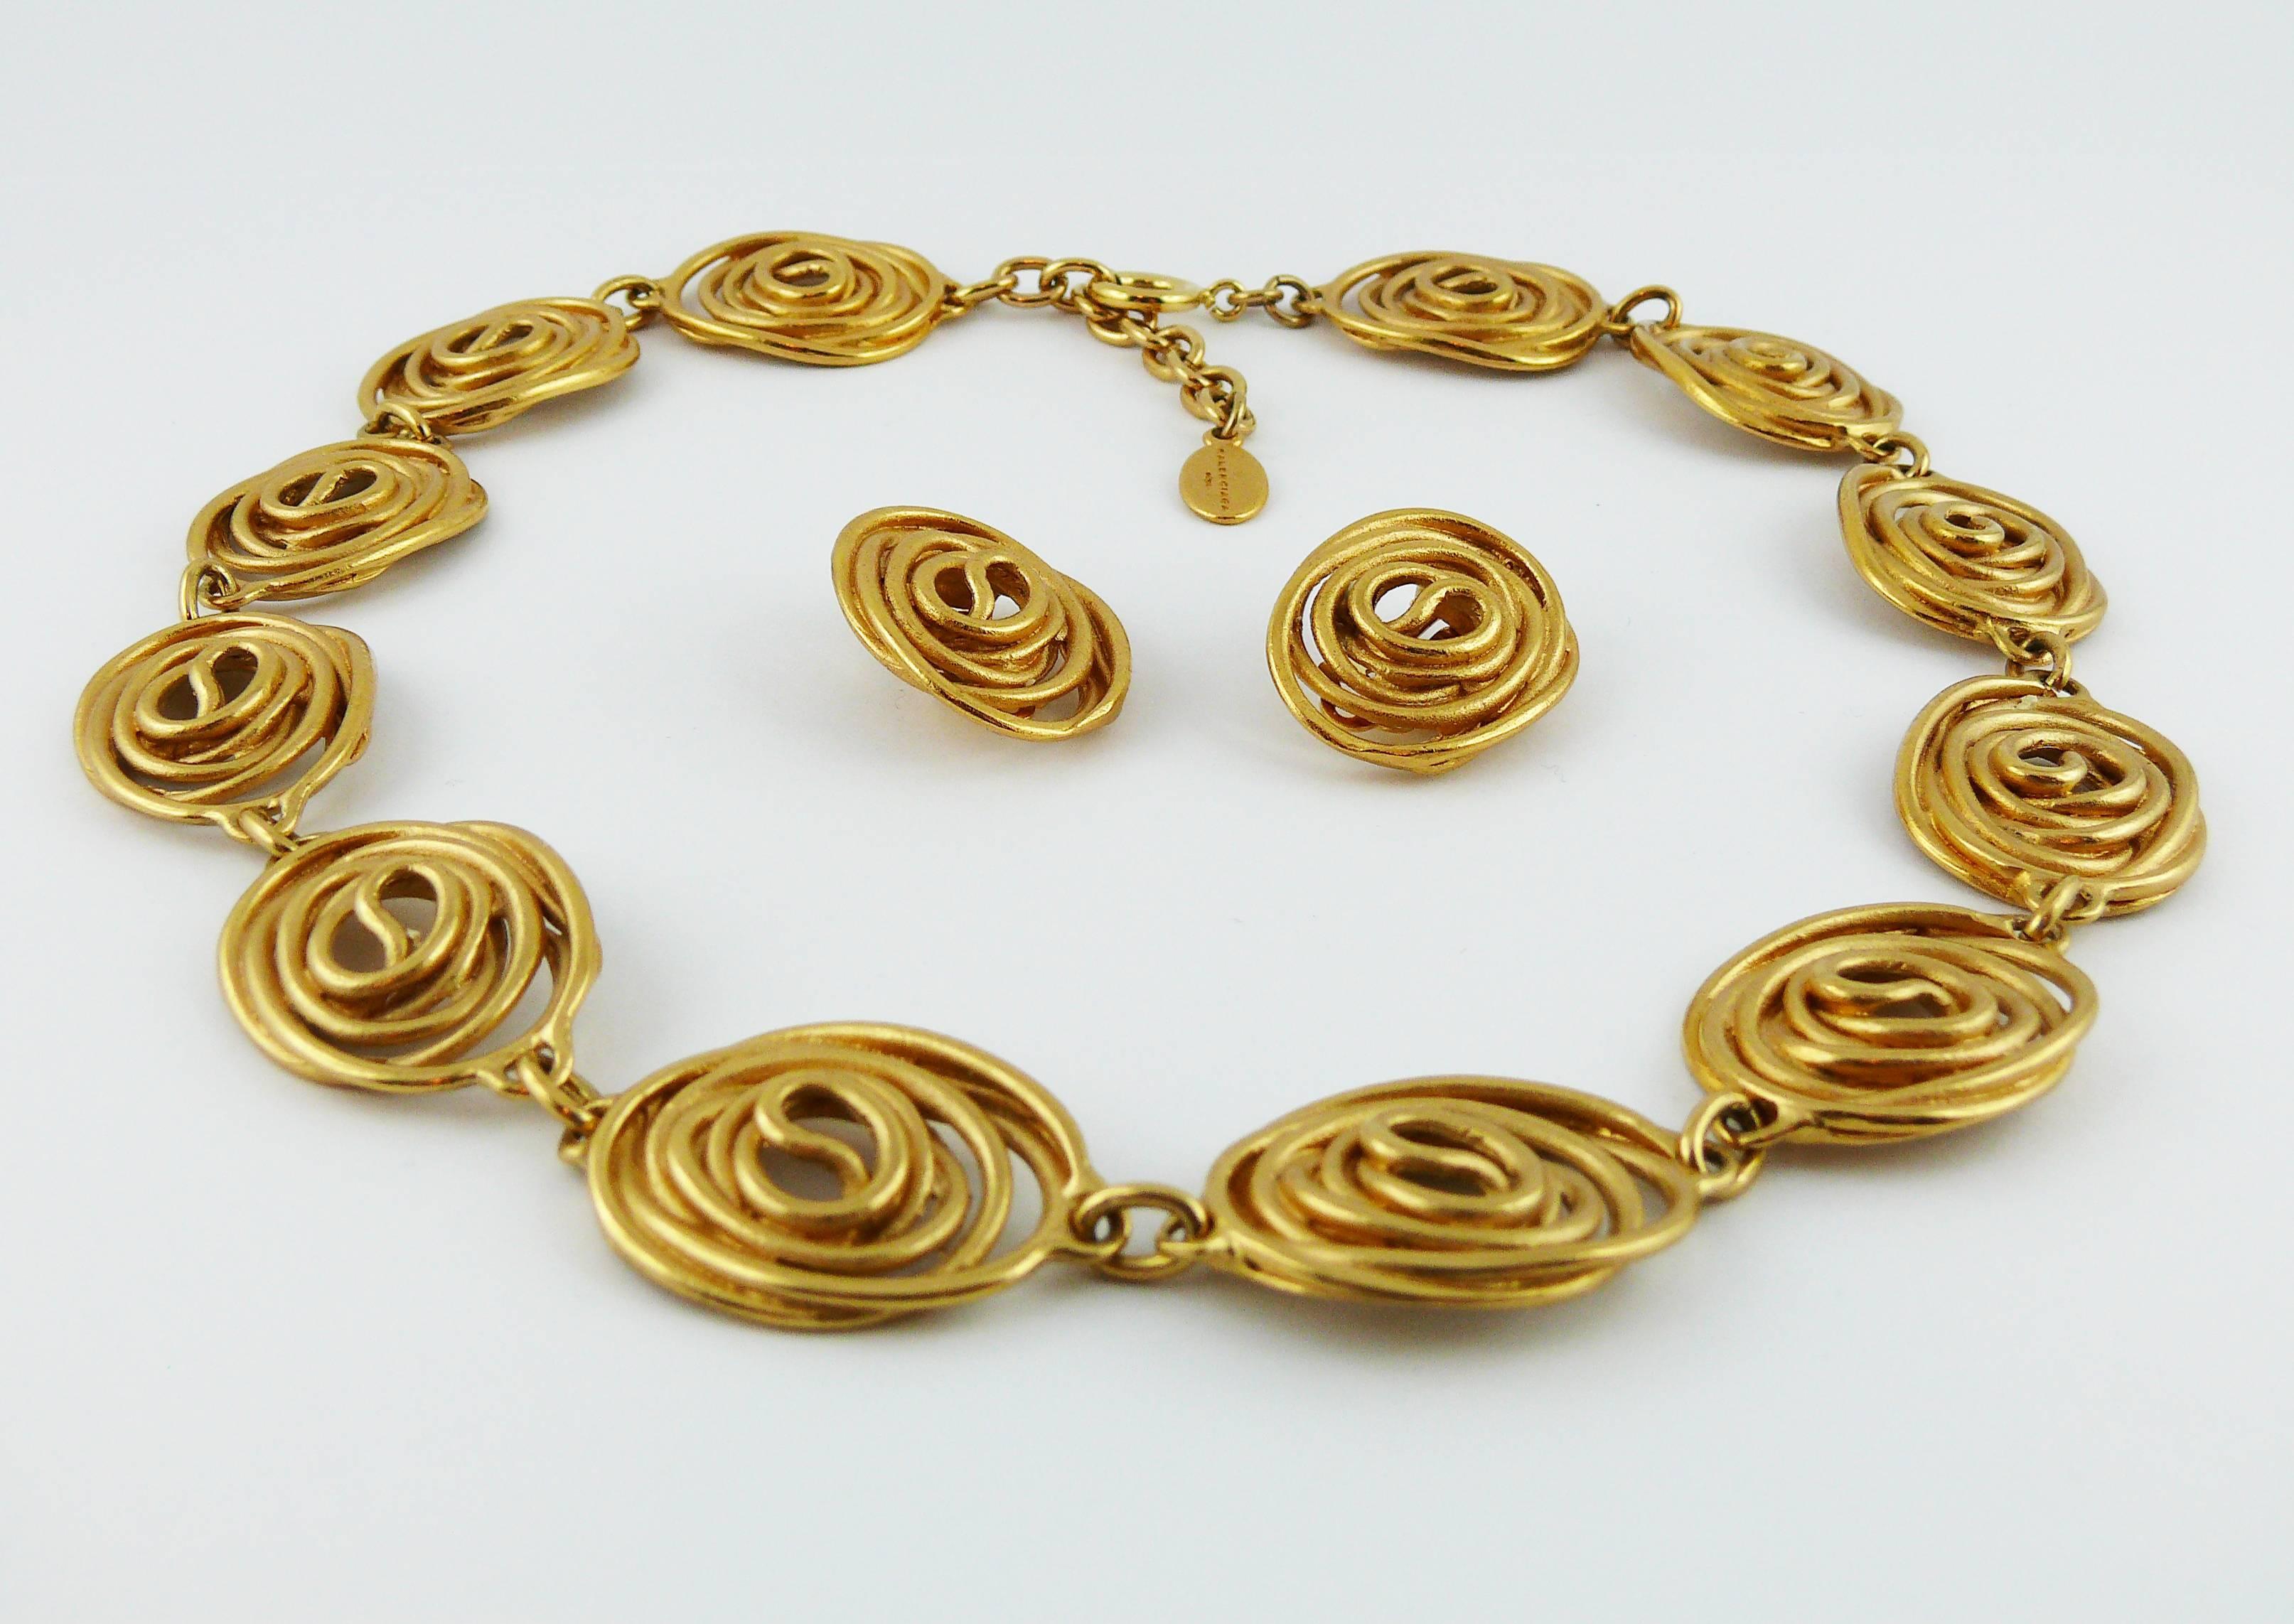 BALENCIAGA vintage matte gold toned necklace and earrings set featuring spirals.

NECKLACE
Spring closure.
Marked BALENCIAGA Paris Made in France.
Indicative measurements : max. length approx. 51.5 cm (20.28 inches) / max. width approx. 2.3 cm (0.91